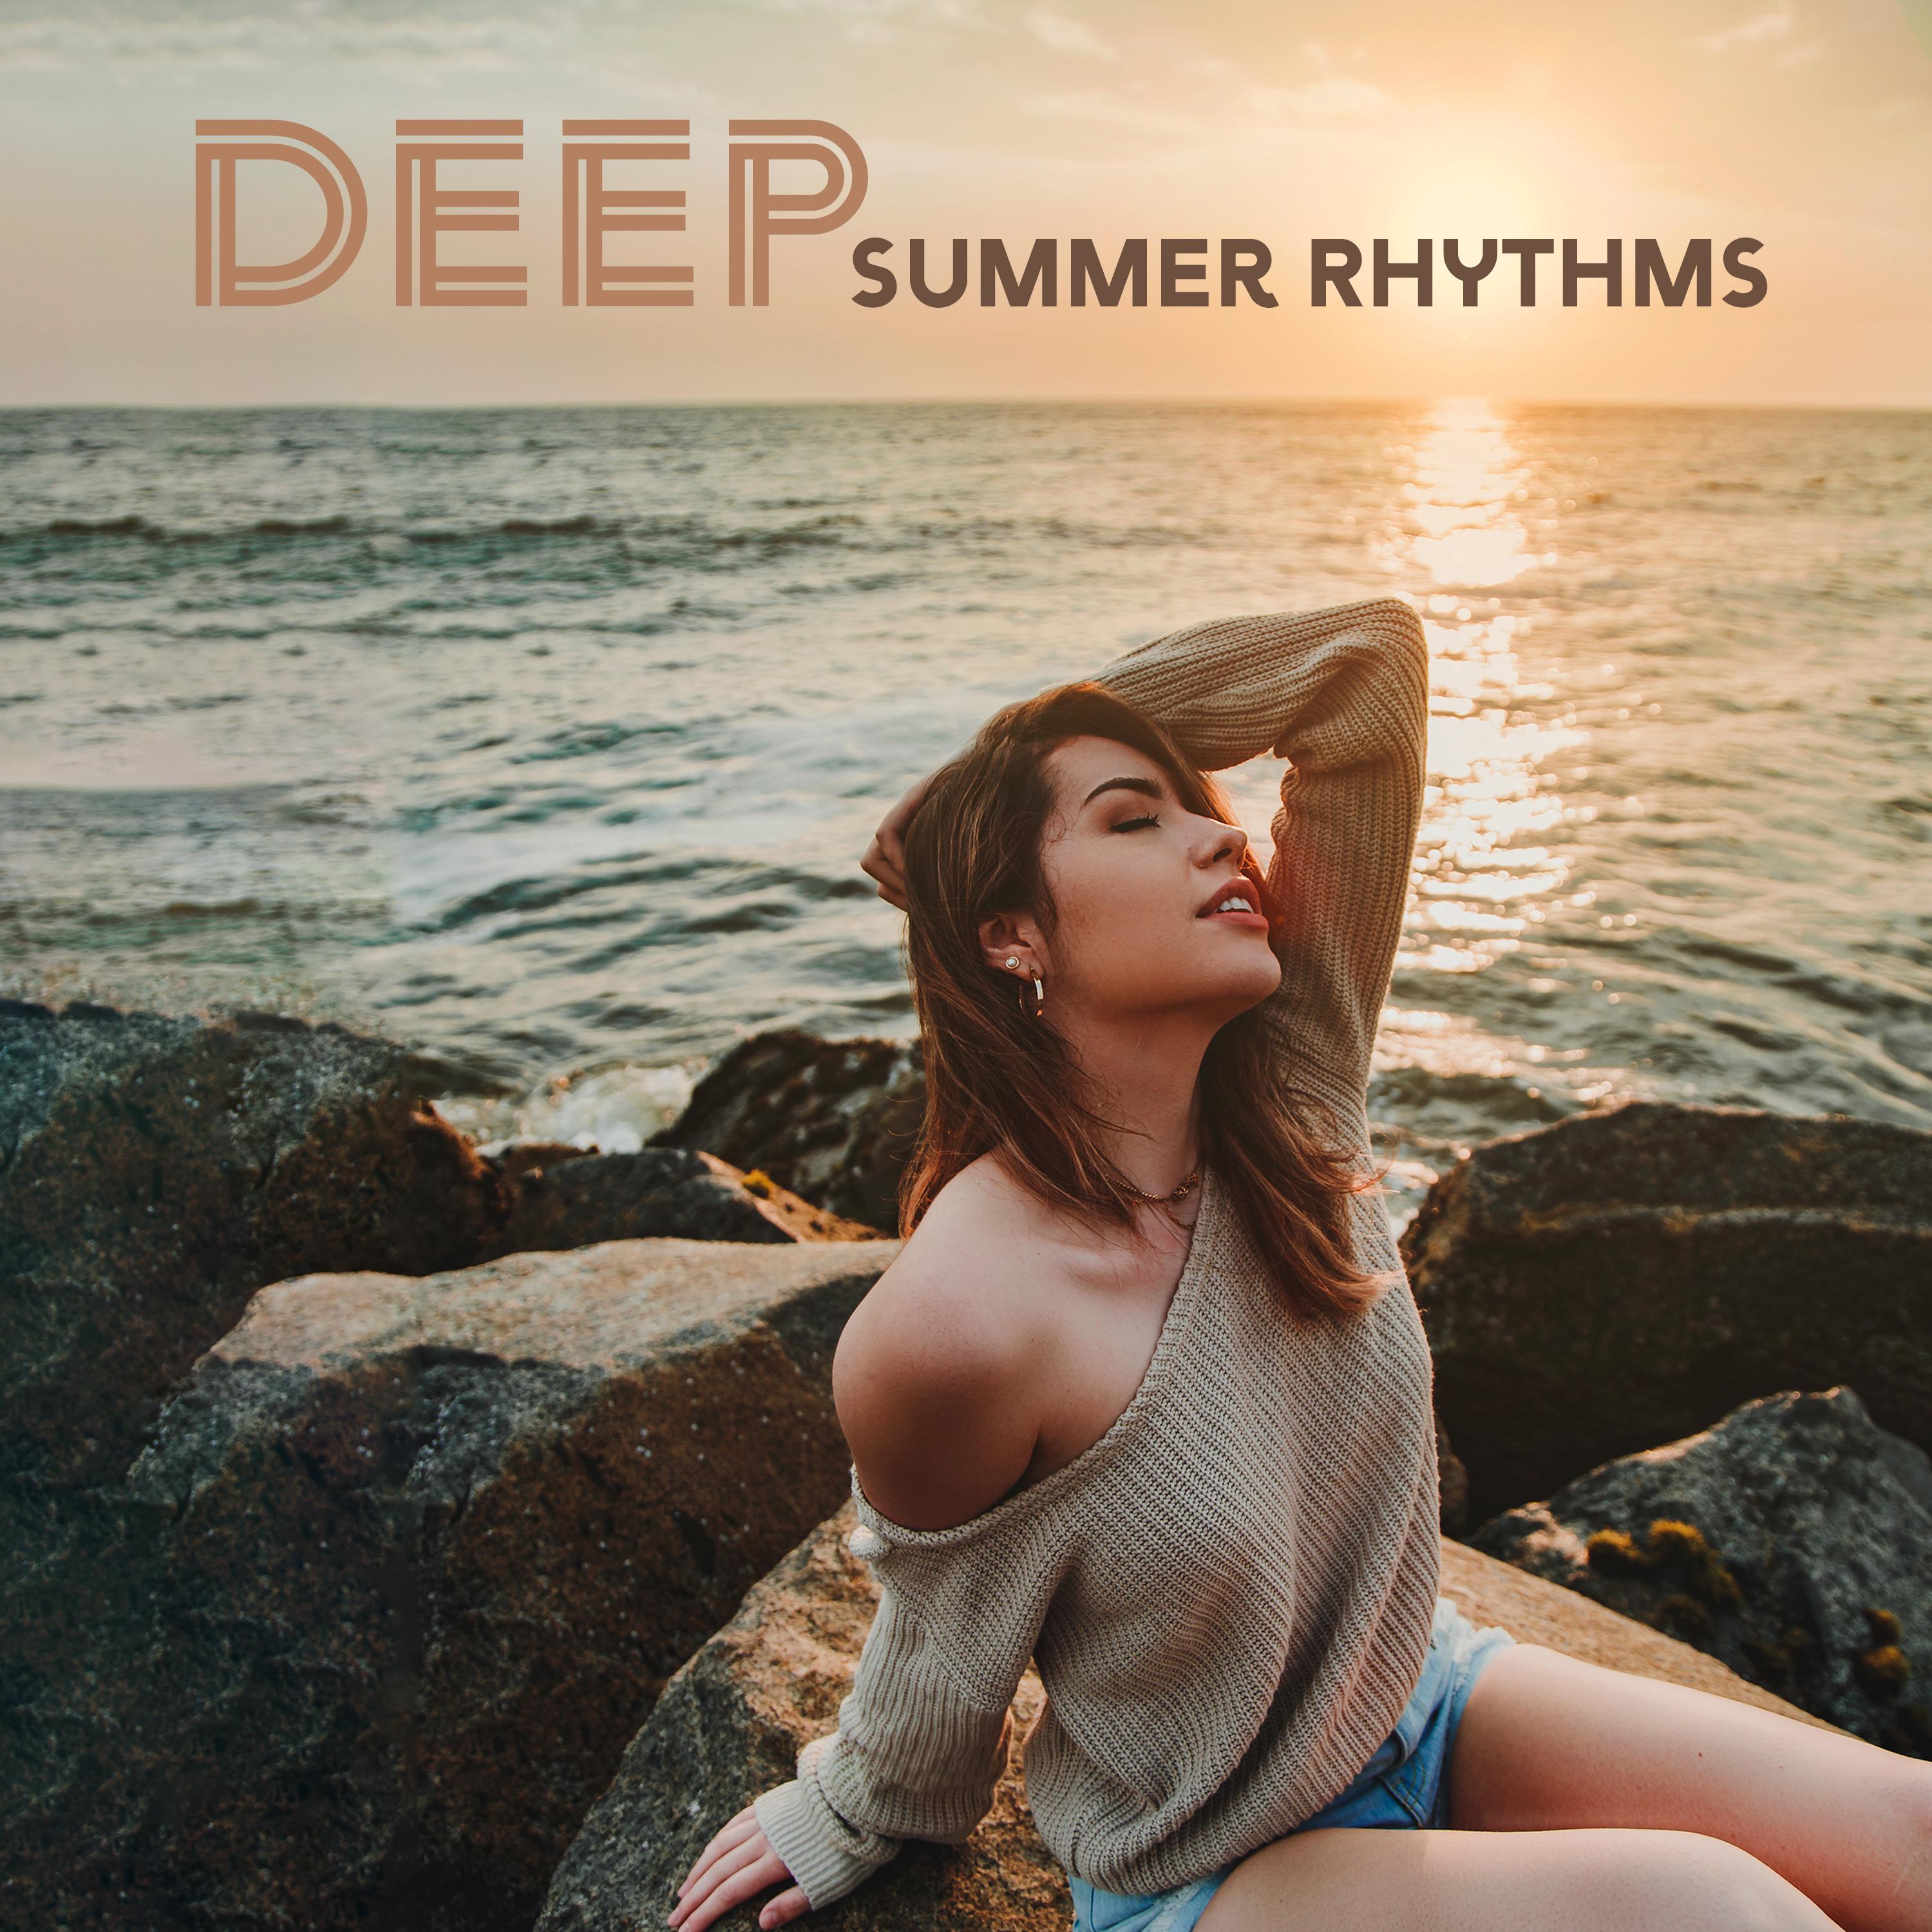 Deep Summer Rhythms - Holiday Songs for Blissful Relaxation, Deserved Rest and Stress Relief